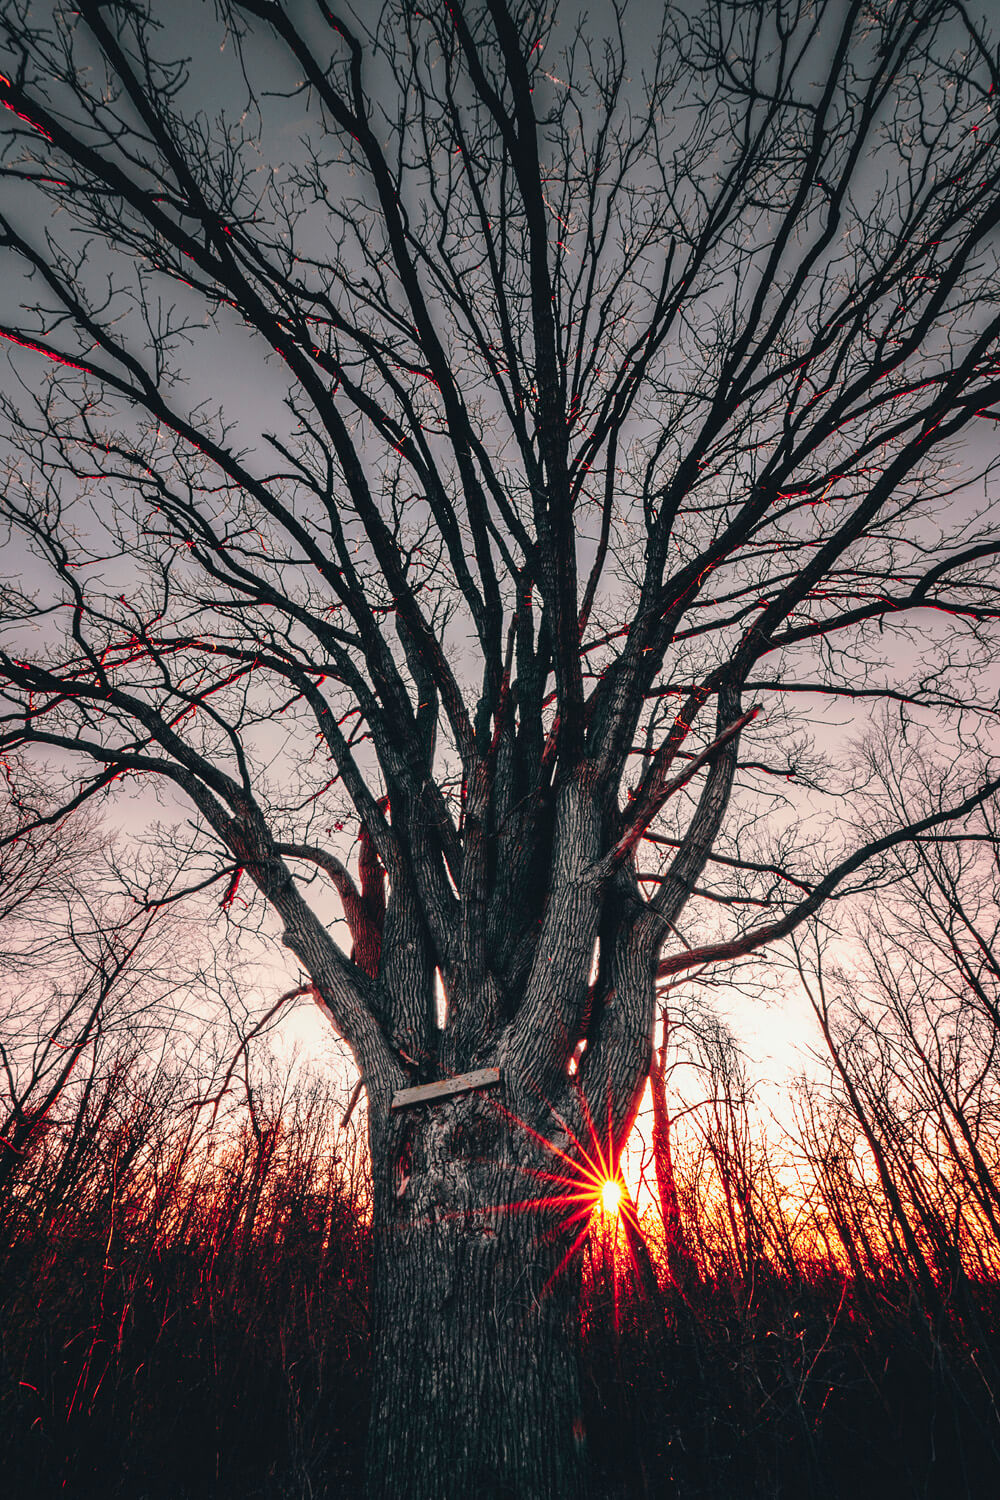 FUJIFILM Creators talk about how a lend can affect your message. Bryan Minear uses a wide angle lens to frame a tree in winter from below with a sunset behind.